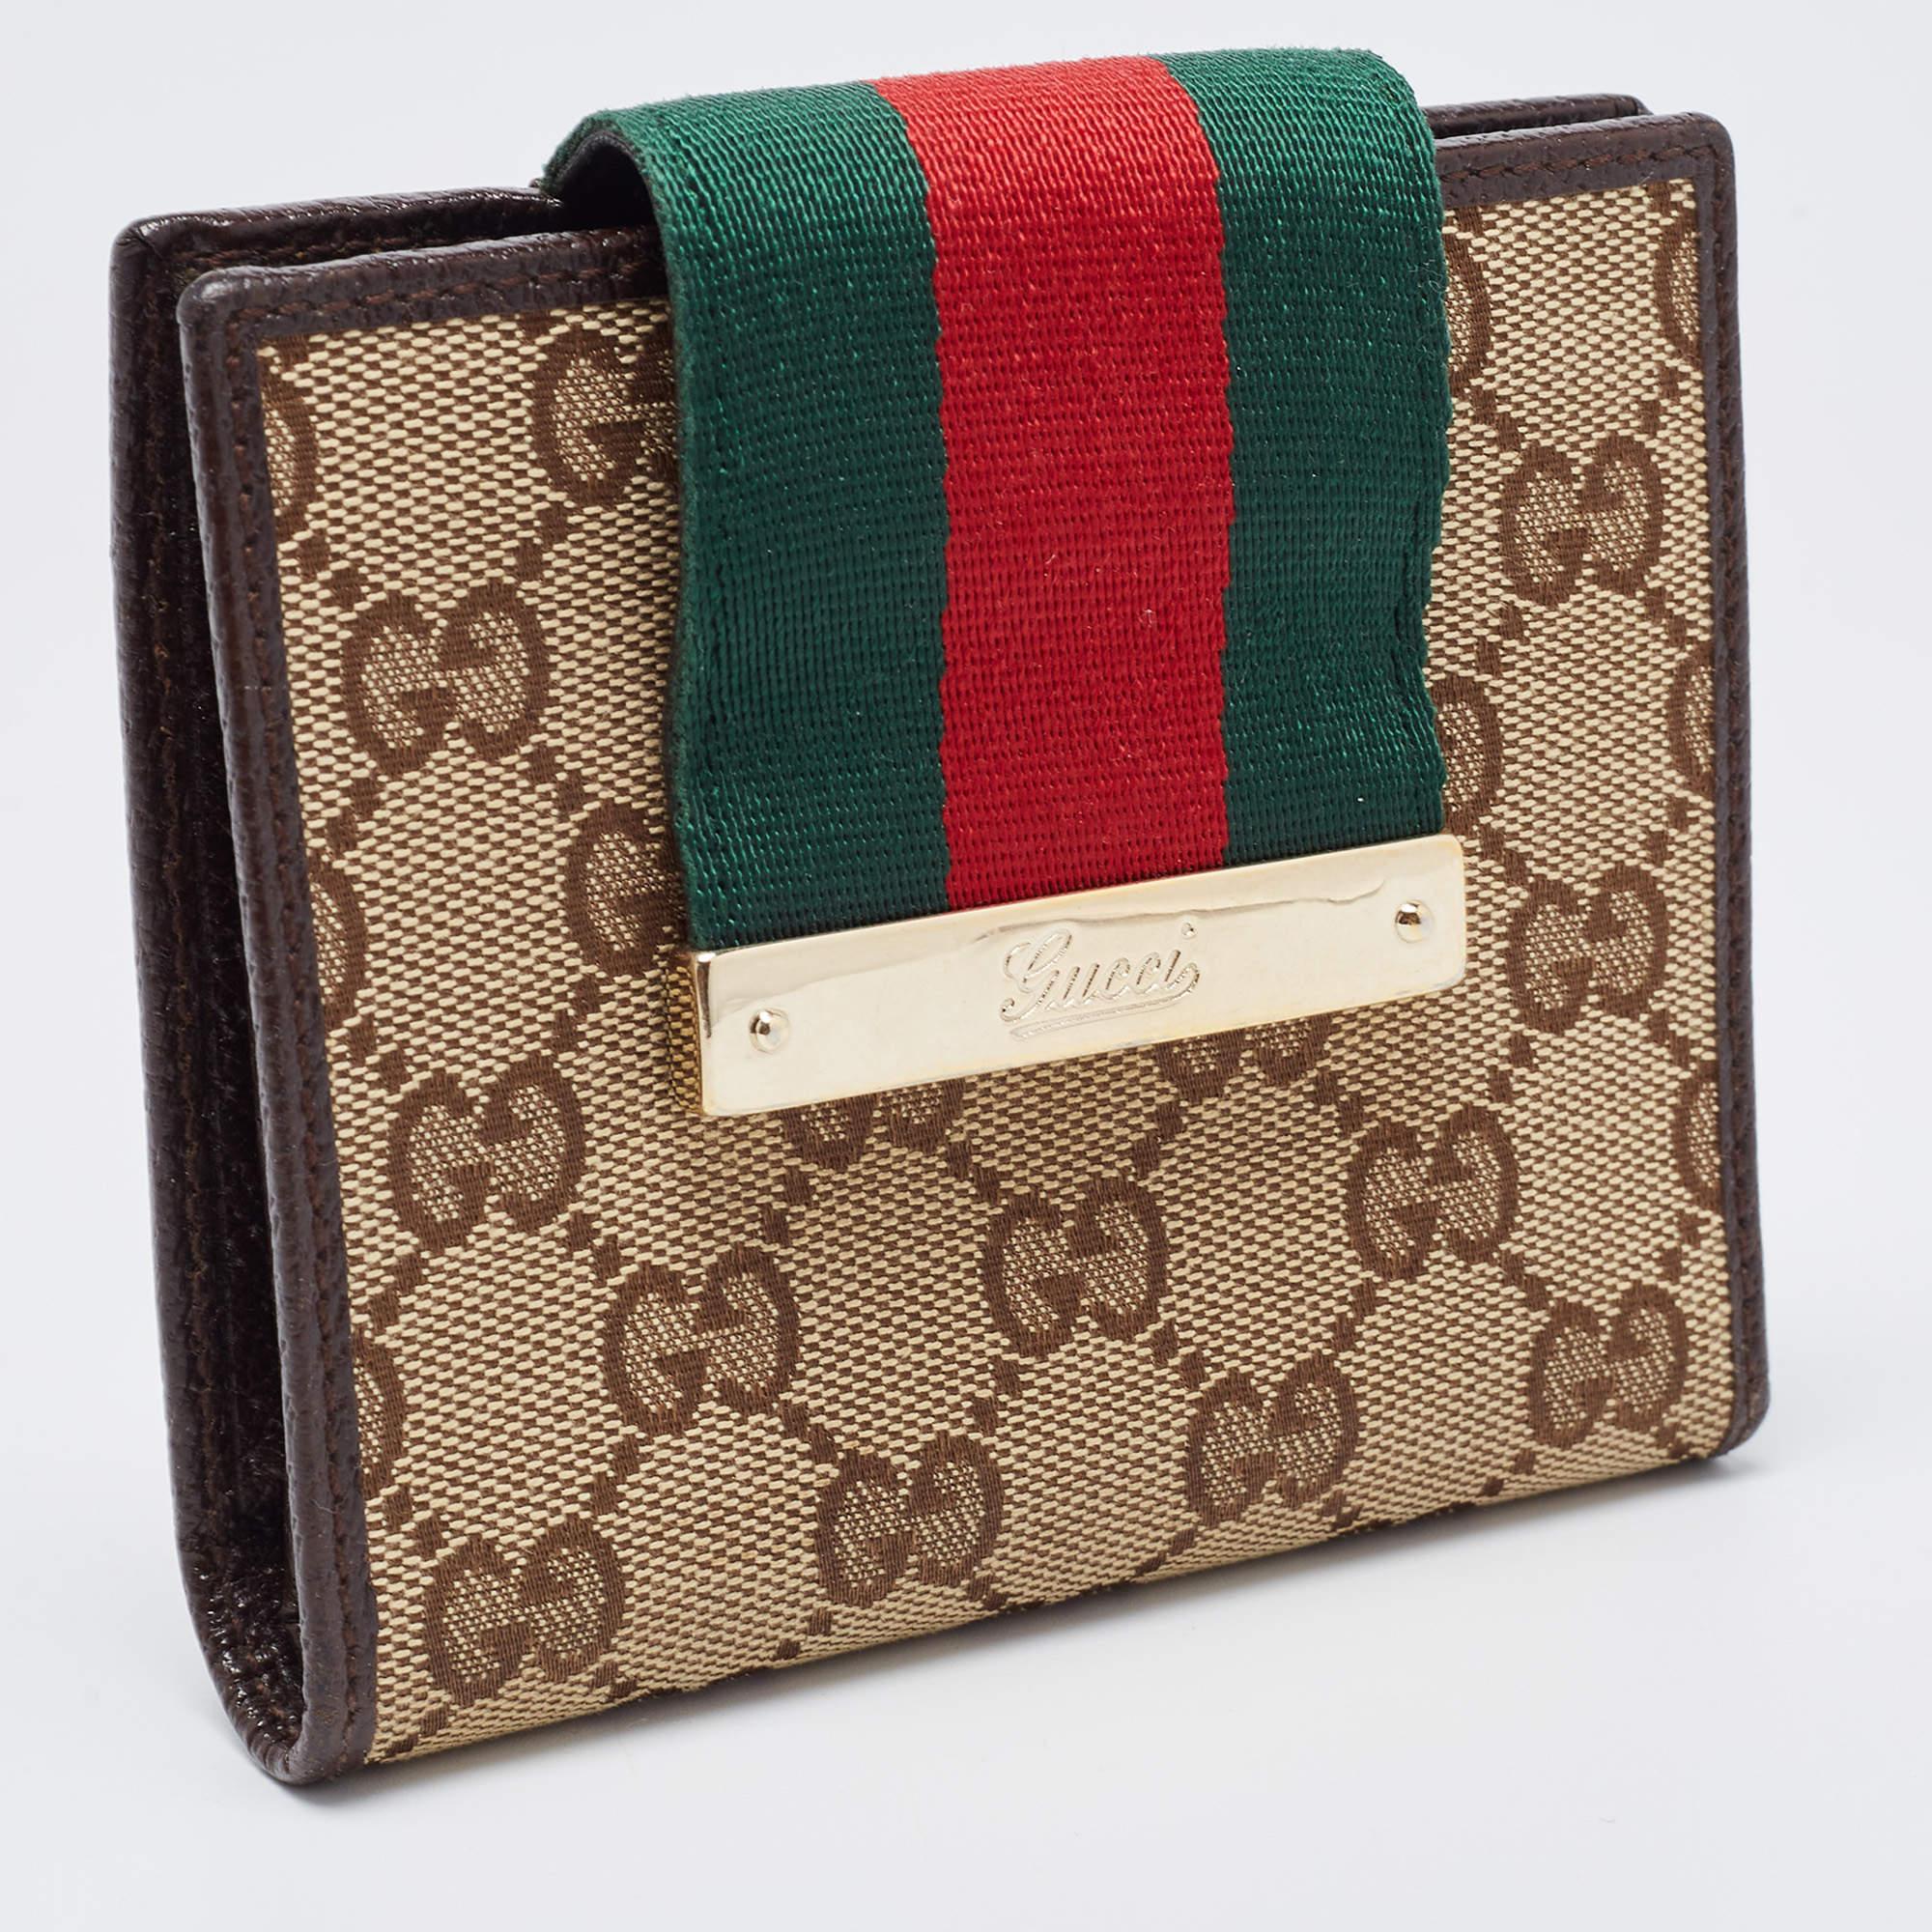 This fine French wallet by Gucci makes for a great accessory. Crafted from the brand's GG canvas and leather, it has a Web-strap closure that opens to a leather & fabric interior. It has several slots to hold your cards and bills.

